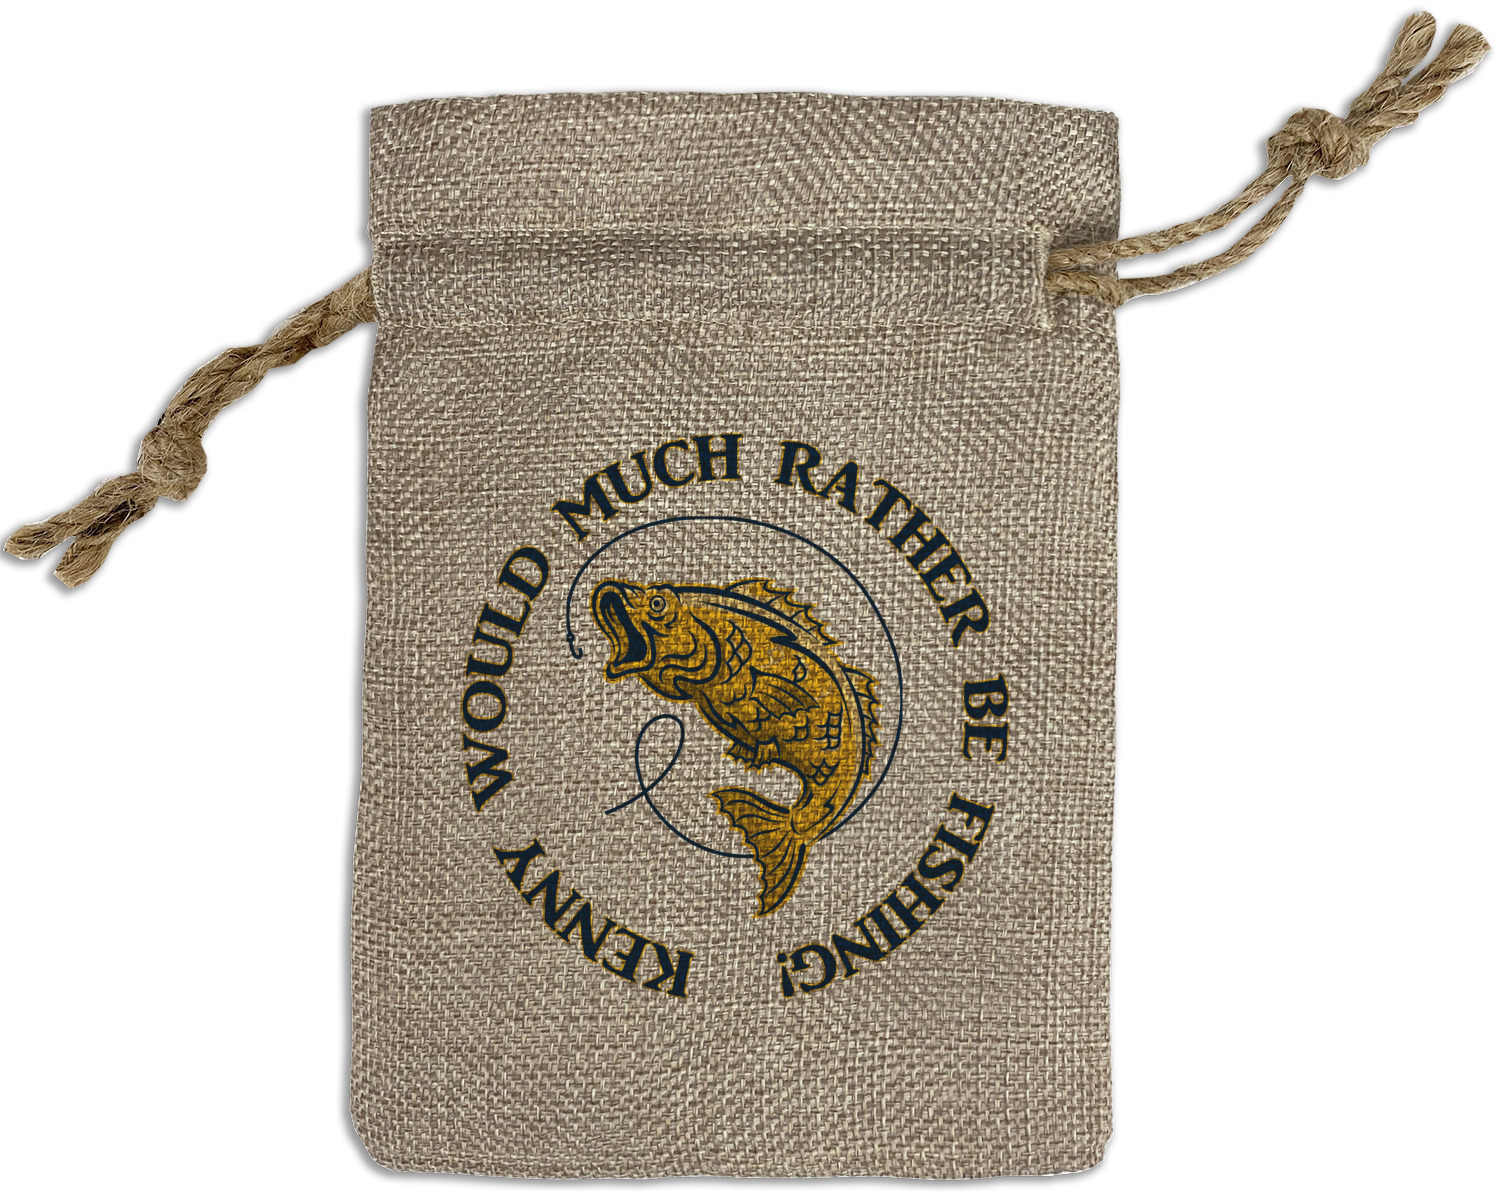 https://www.youcustomizeit.com/common/MAKE/341734/Fish-Small-Burlap-Gift-Bag-Front.jpg?lm=1697657809